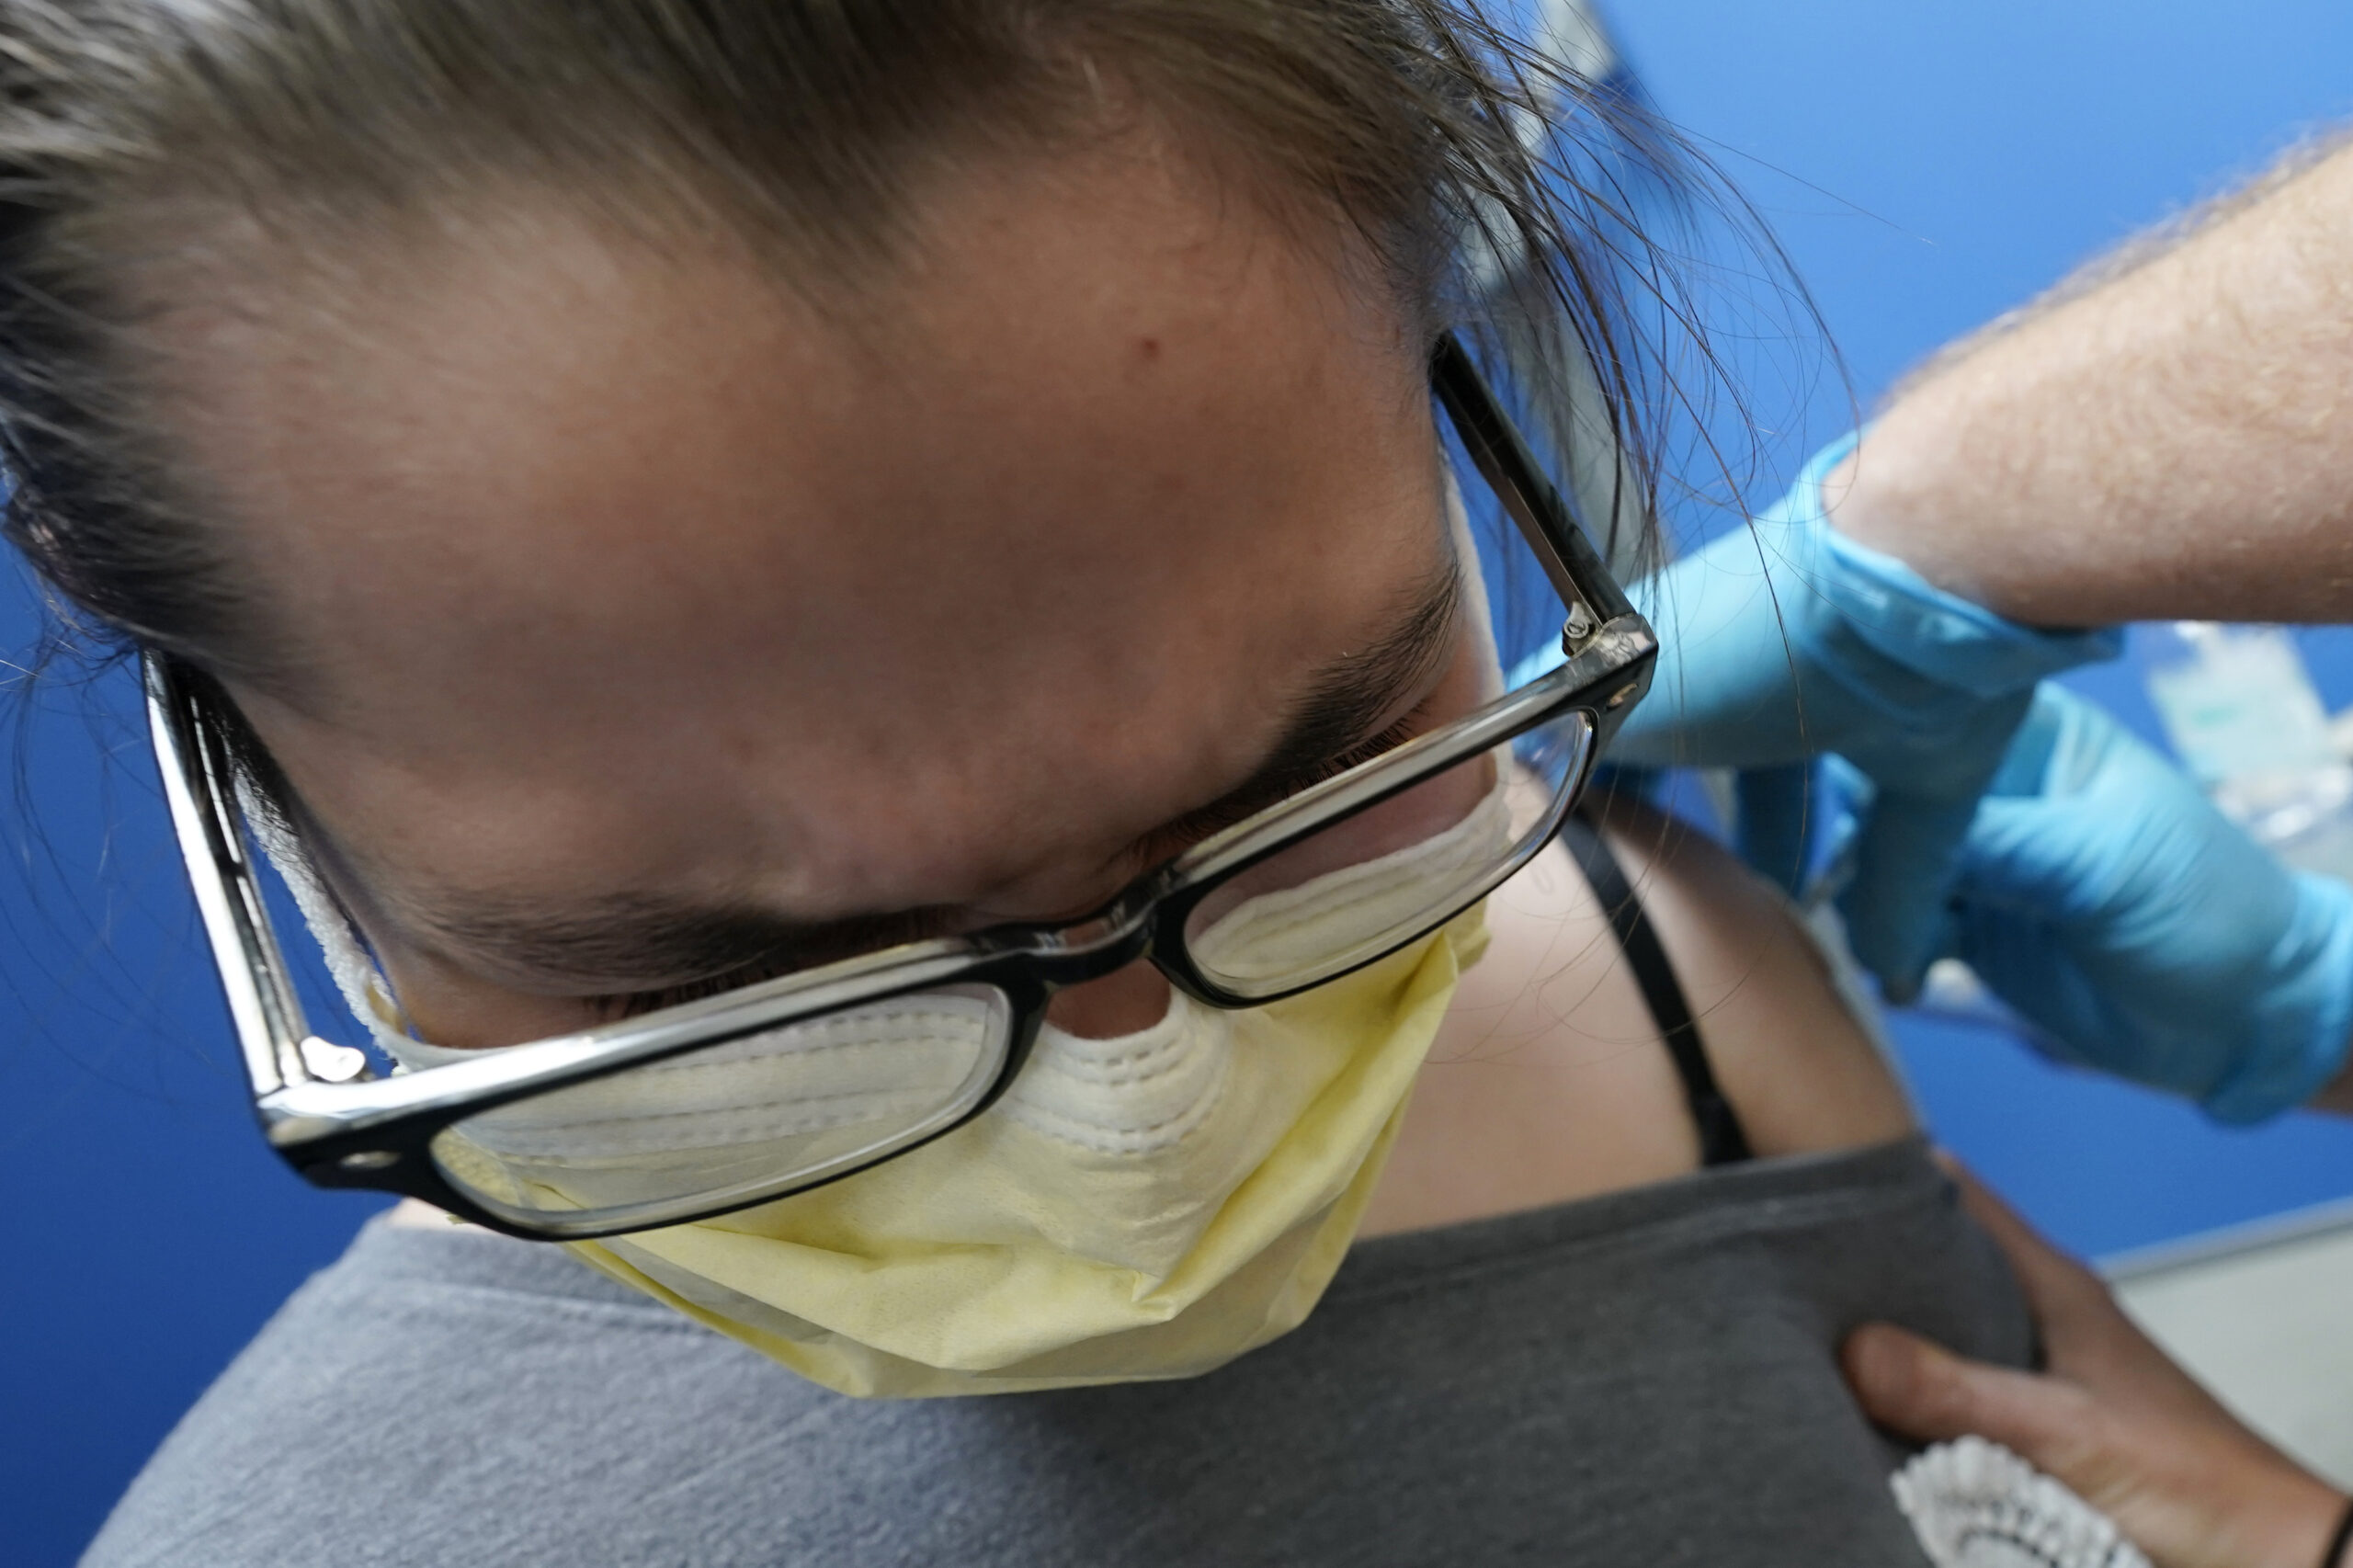 Thirteen-year-old Bryleigh Roop gets his first dose of the Pfizer COVID-19 vaccine